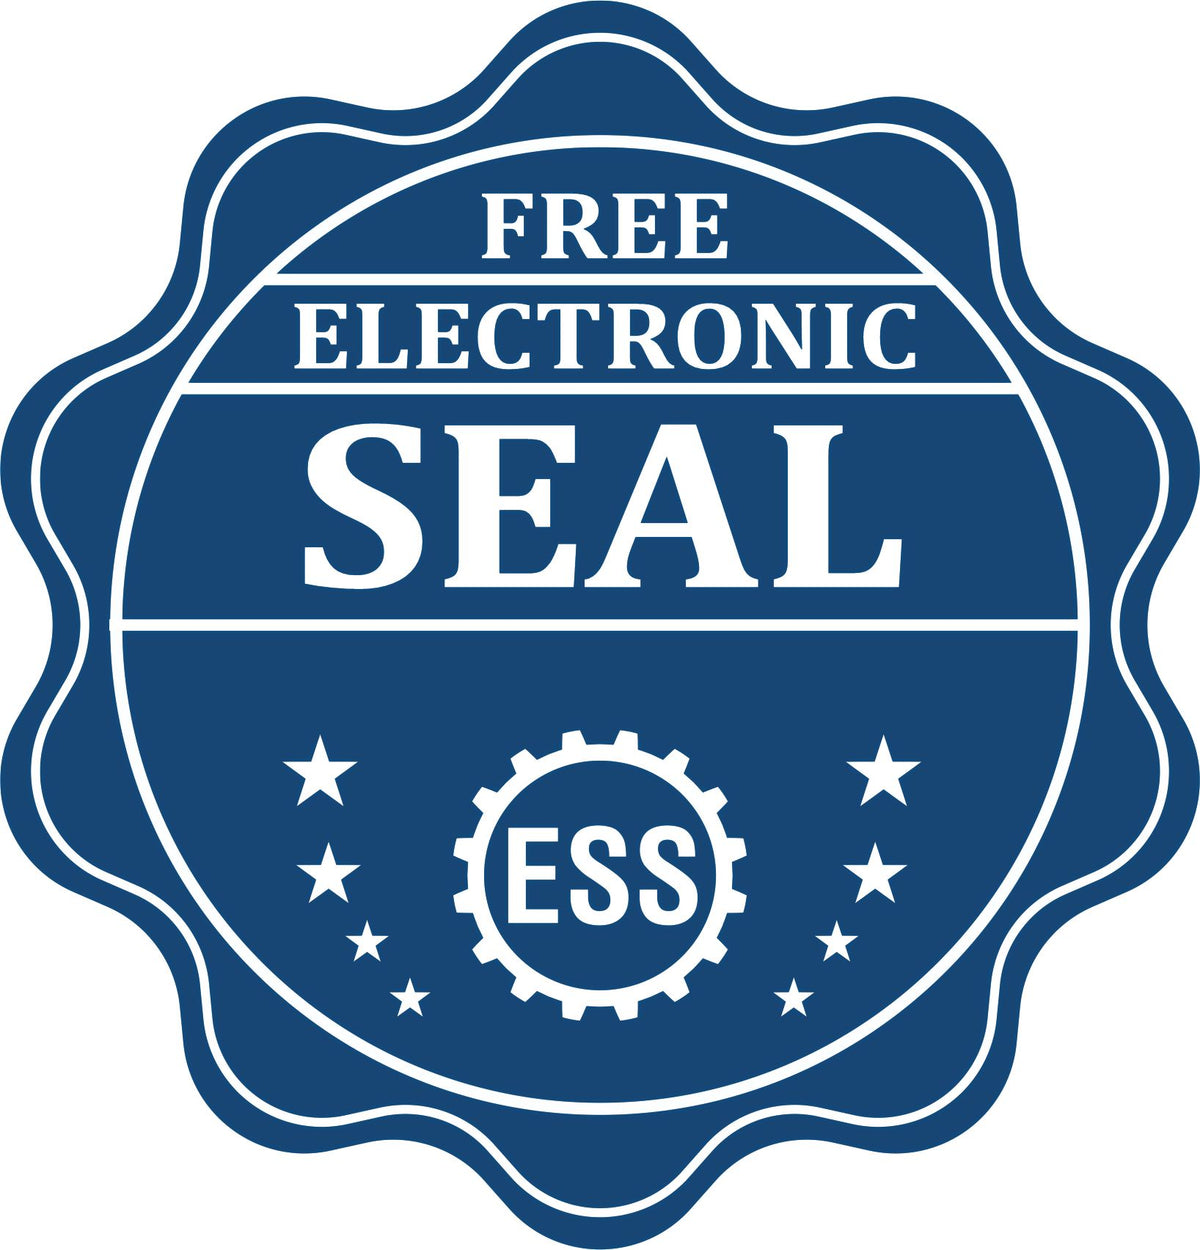 A badge showing a free electronic seal for the Gift Washington Engineer Seal with stars and the ESS gear on the emblem.